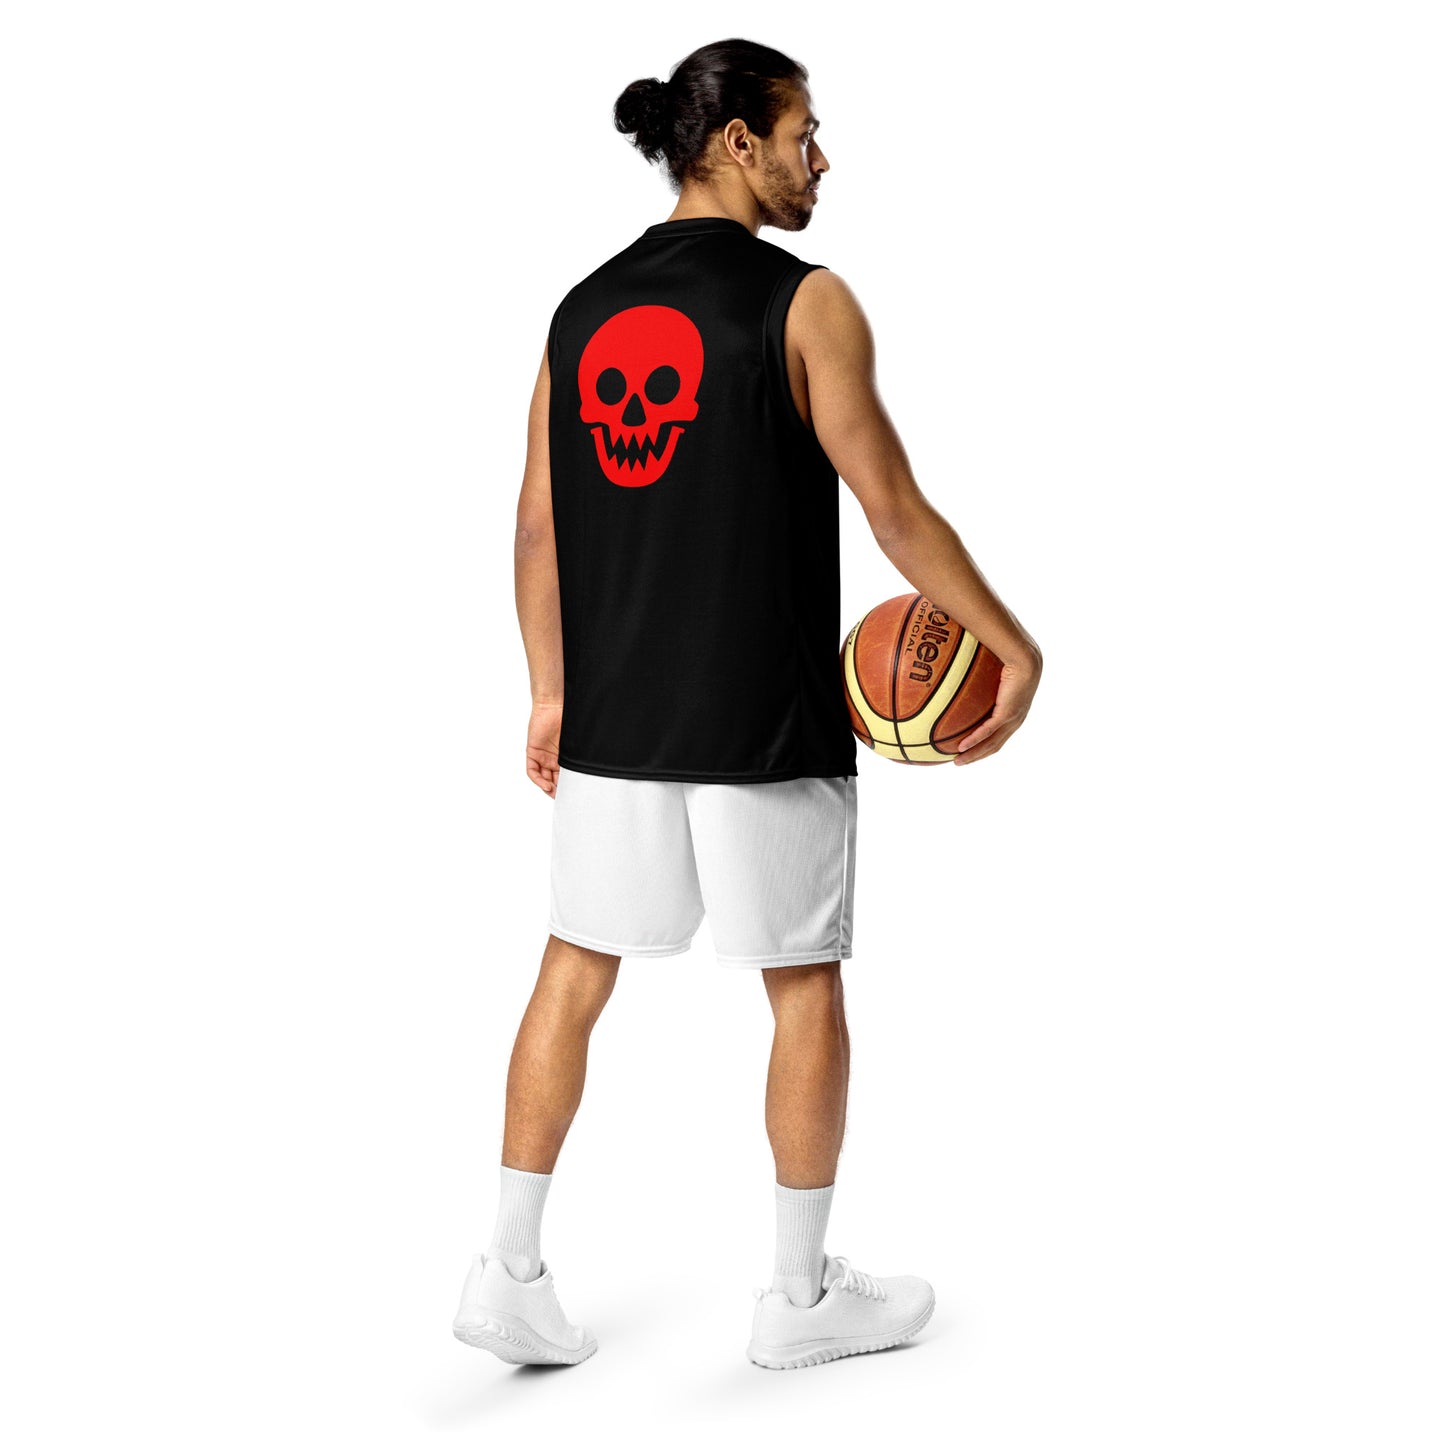 RED SKULL A2 - unisex basketball jersey